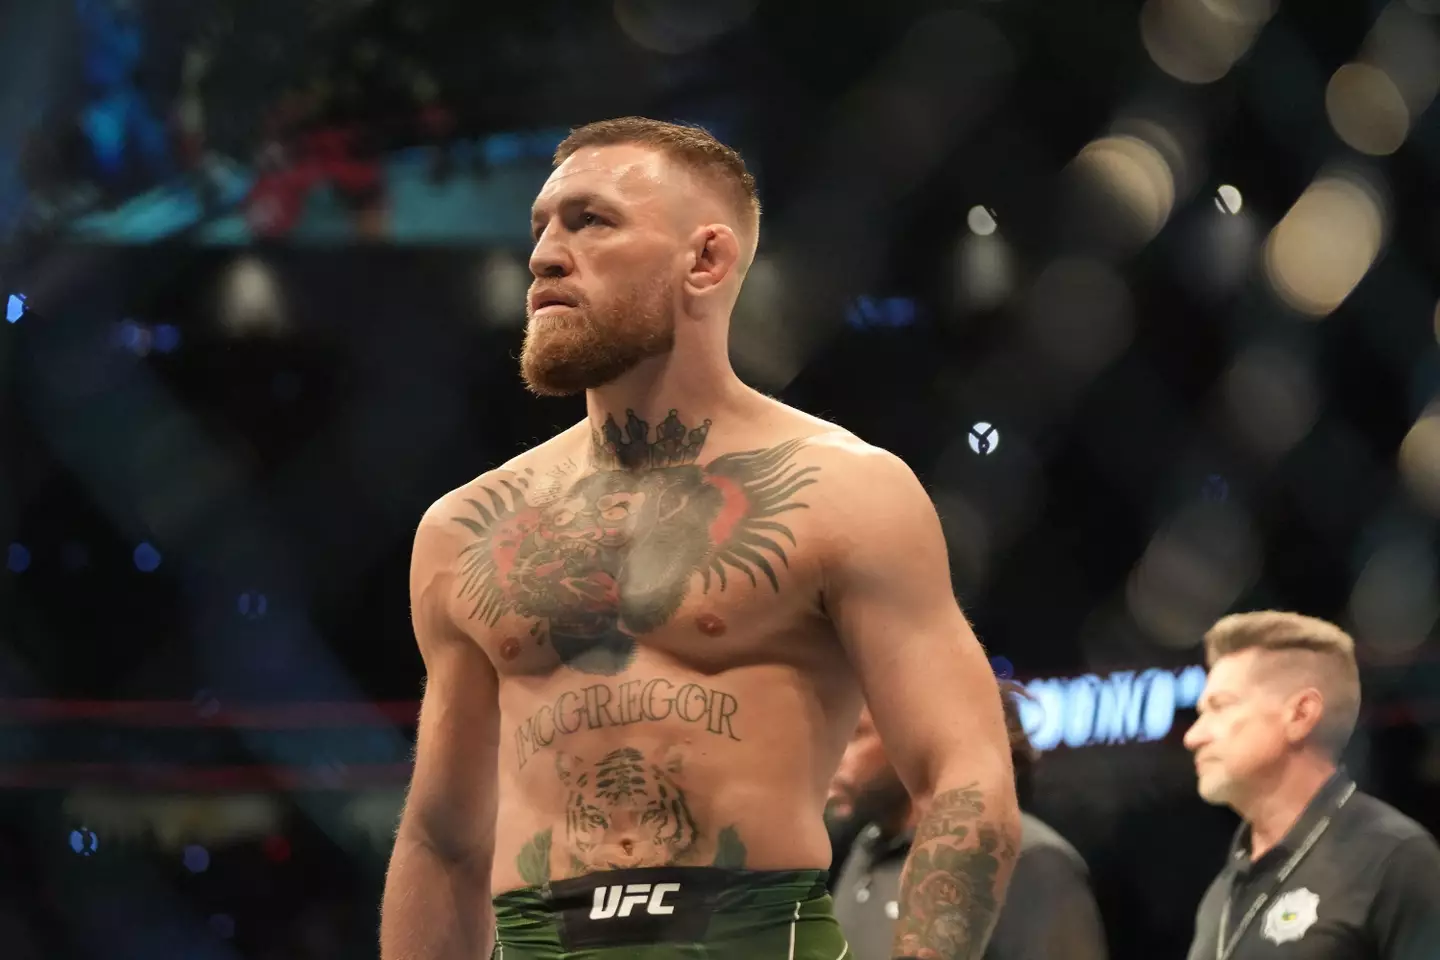 Conor McGregor is yet to respond to Paul's MMA offer.